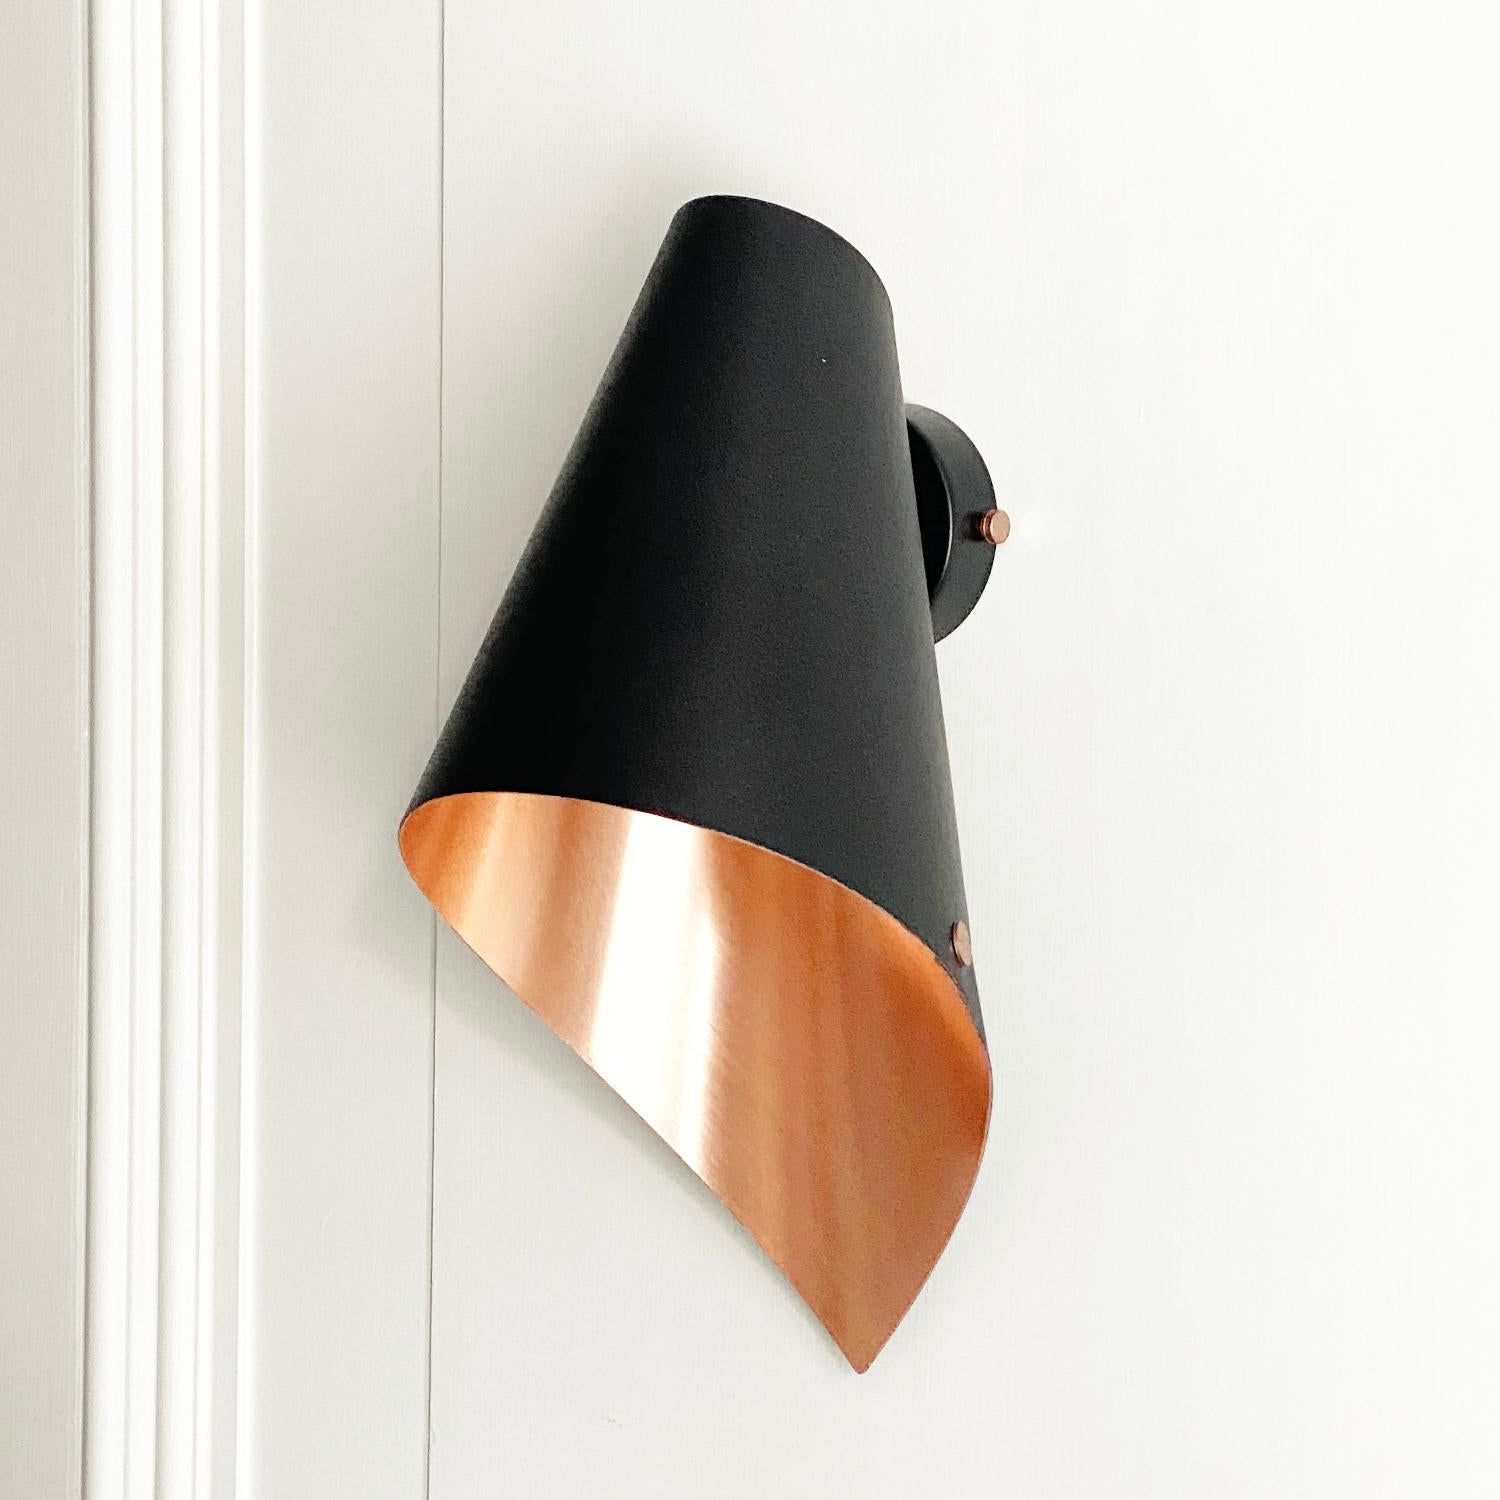 This beautiful brushed copper & matte black wall light is from our debut British lighting range.

Our contemporary wall lights are perfect for bathing your home in beautiful light, maybe above your favourite chair or beside your bedside for